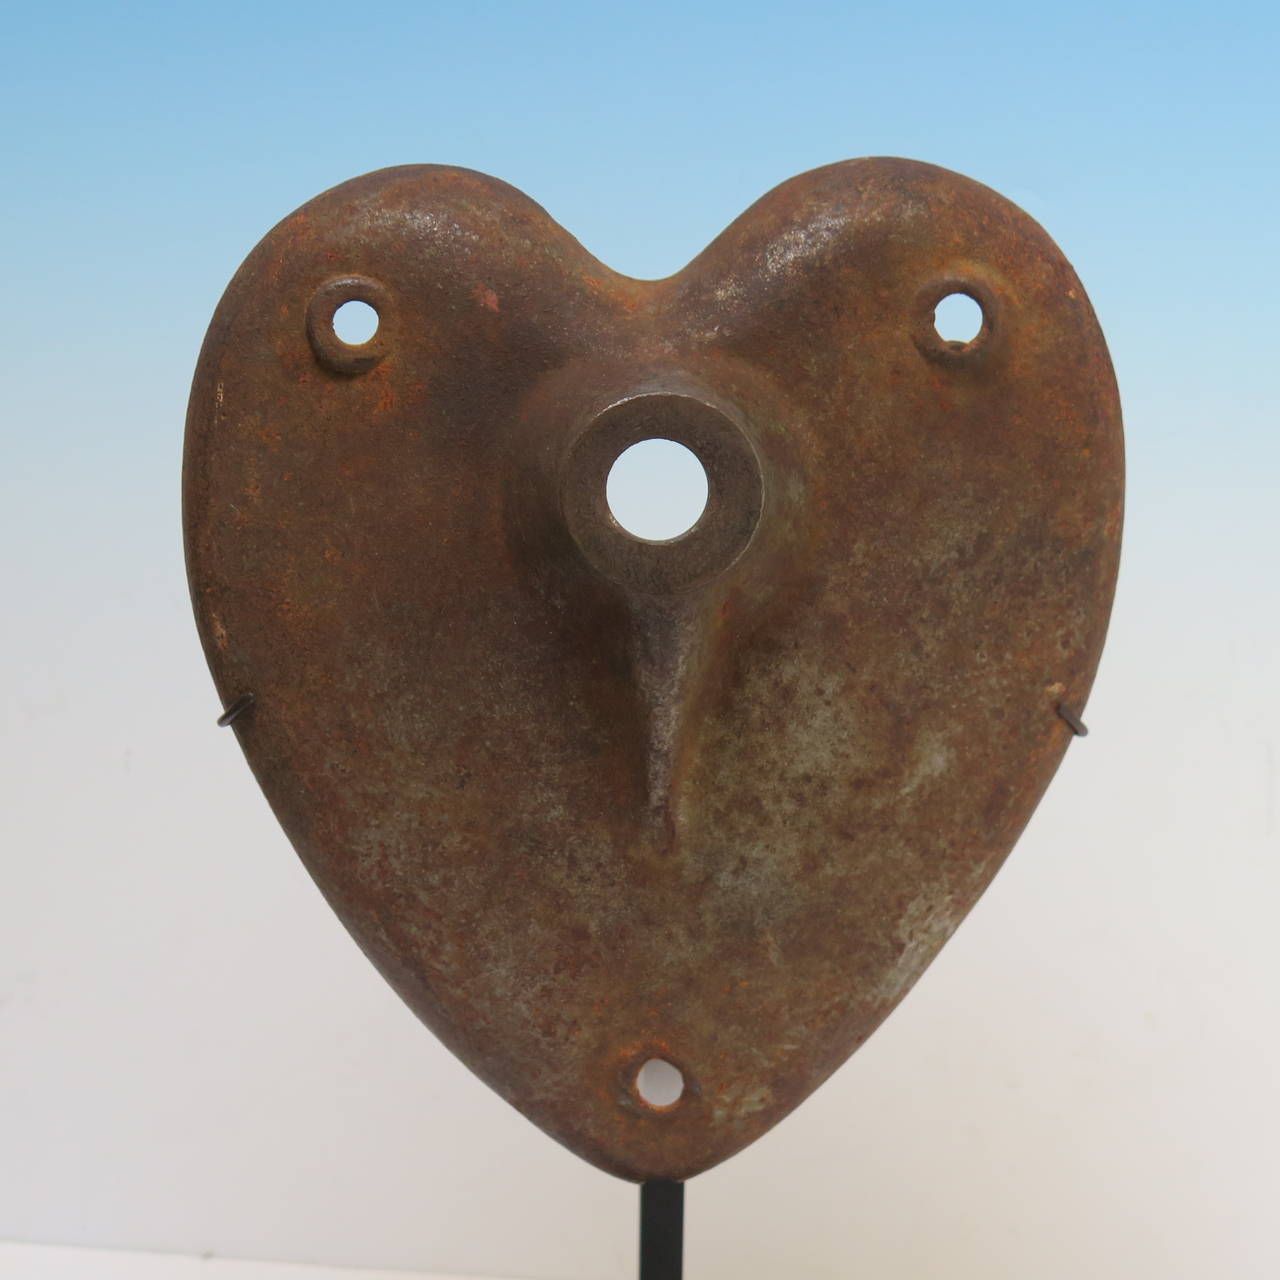 A large iron Industrial heart form with three holes for attachment and a larger raised central hole possibly for a rod or shaft. This piece came to me from Iowa which might suggest it came off of some farm machinery. The rounded shape is beautifully